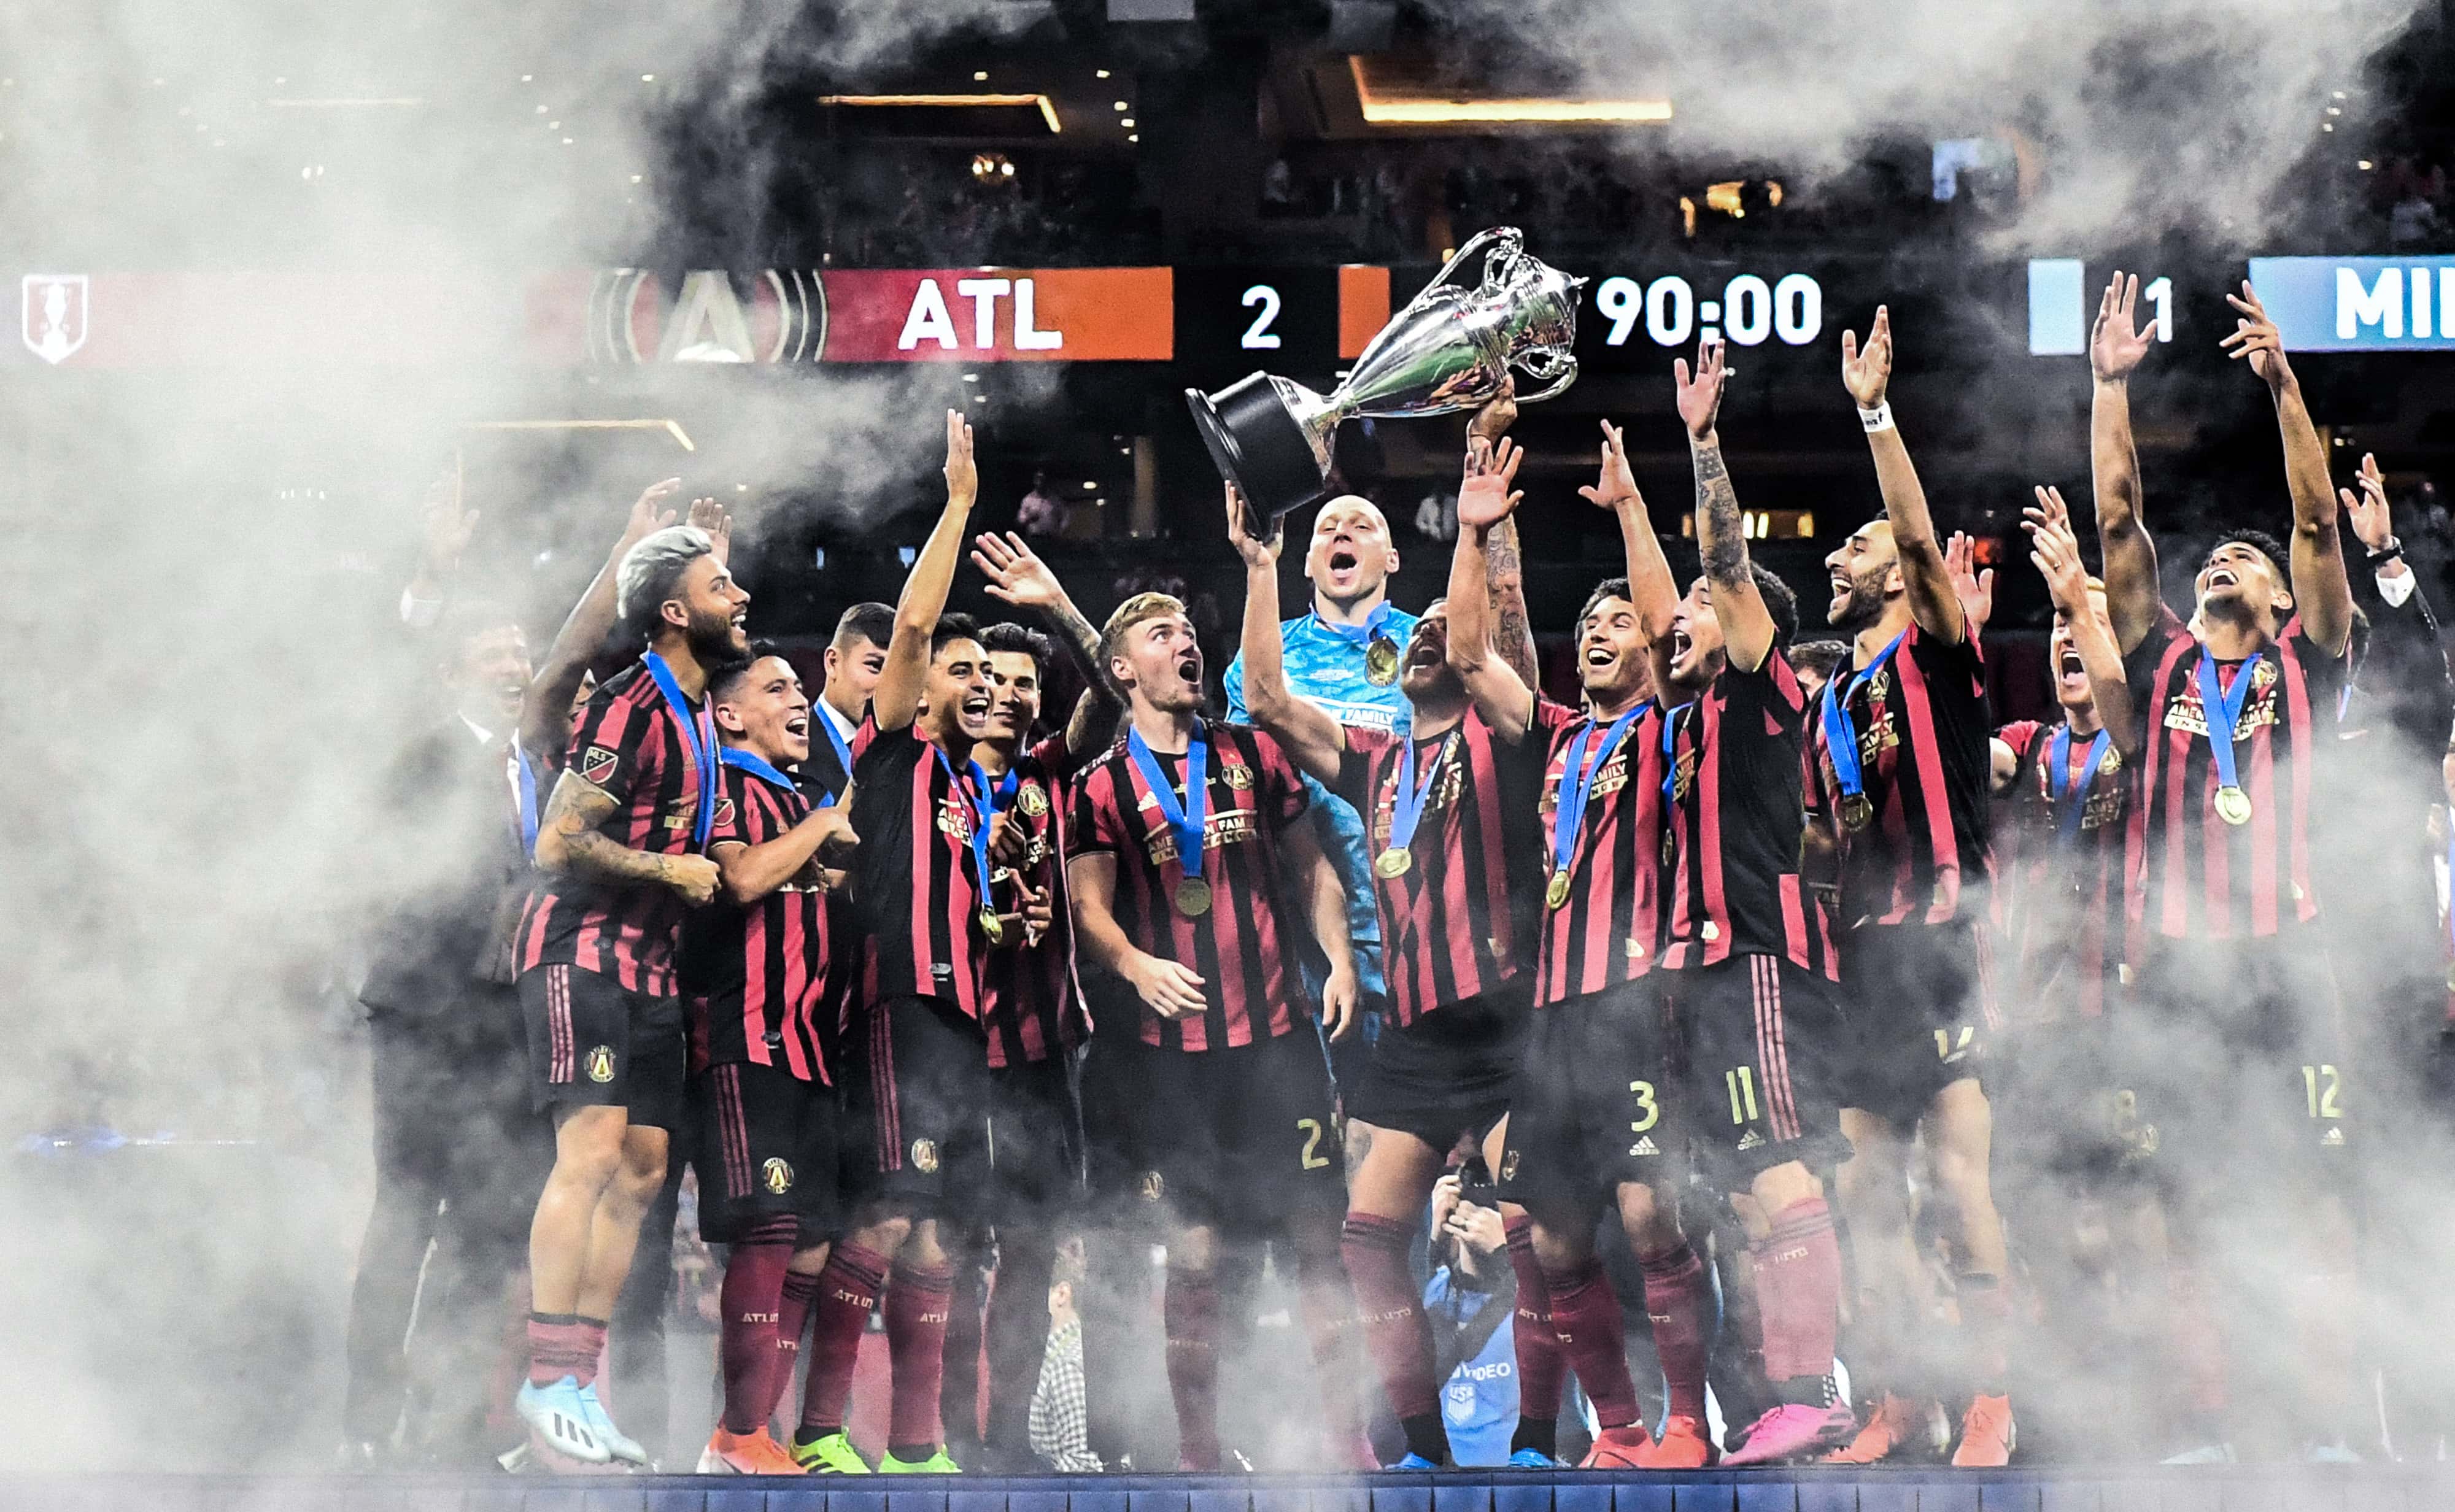 The 2019 U.S. Open Cup Final in Photos